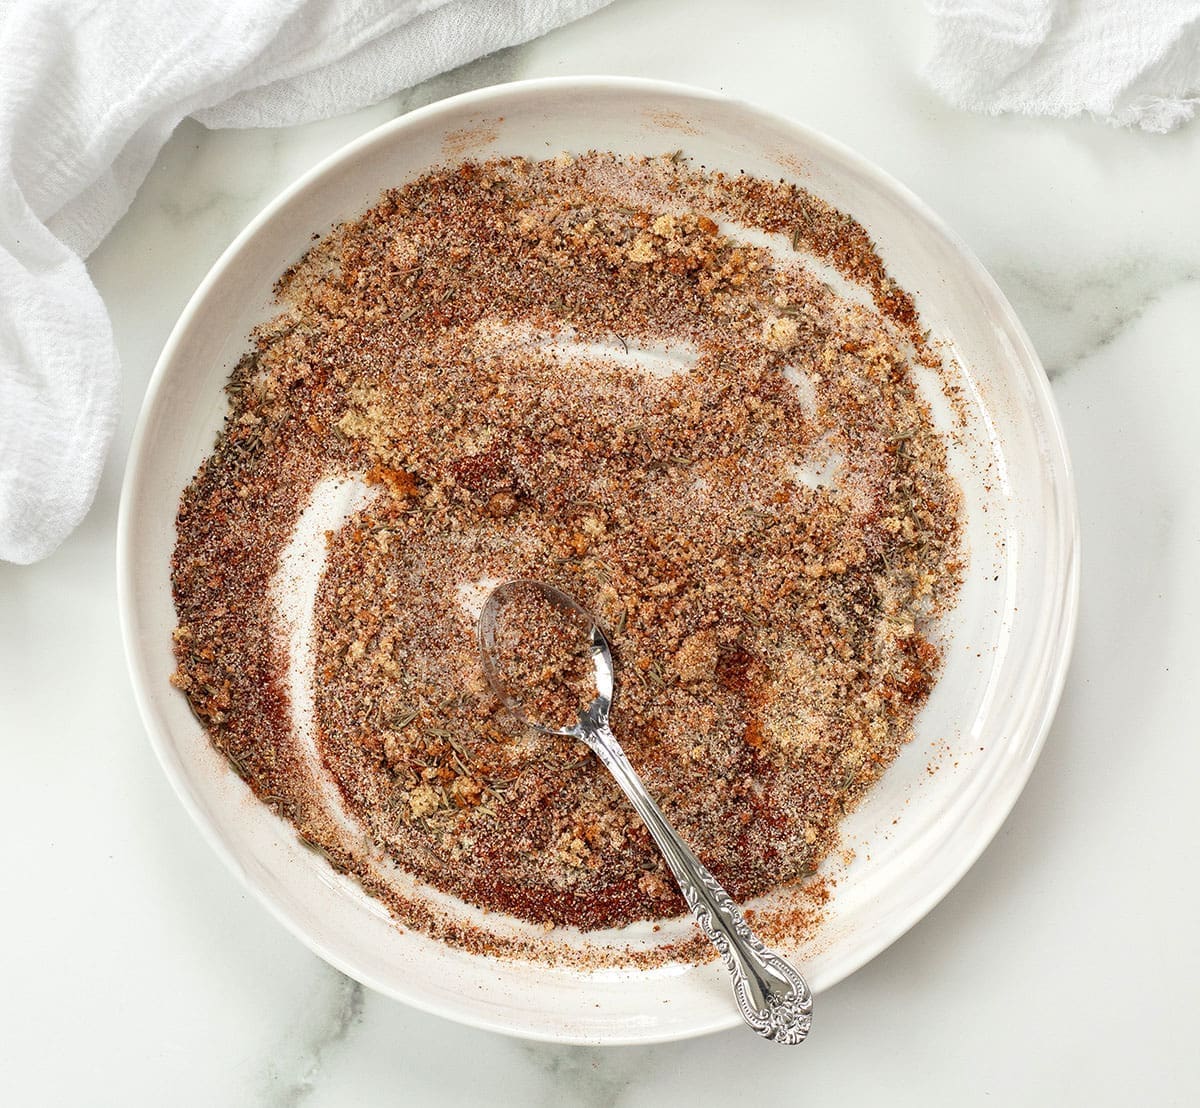 Smoke rub for chicken spices on a white plate with a silver spoon.